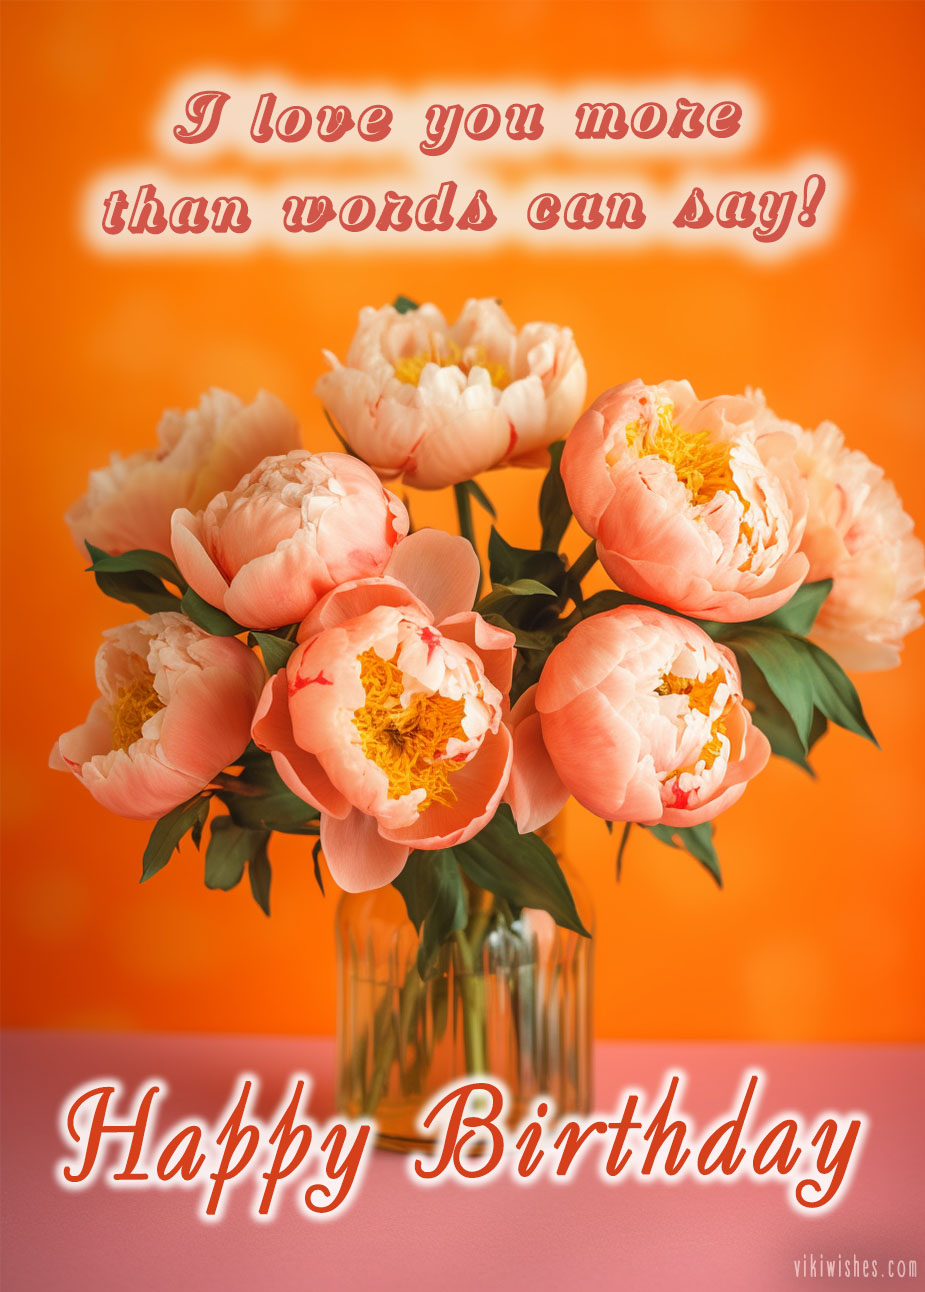 Beautiful flowers image for your wife on your birthday